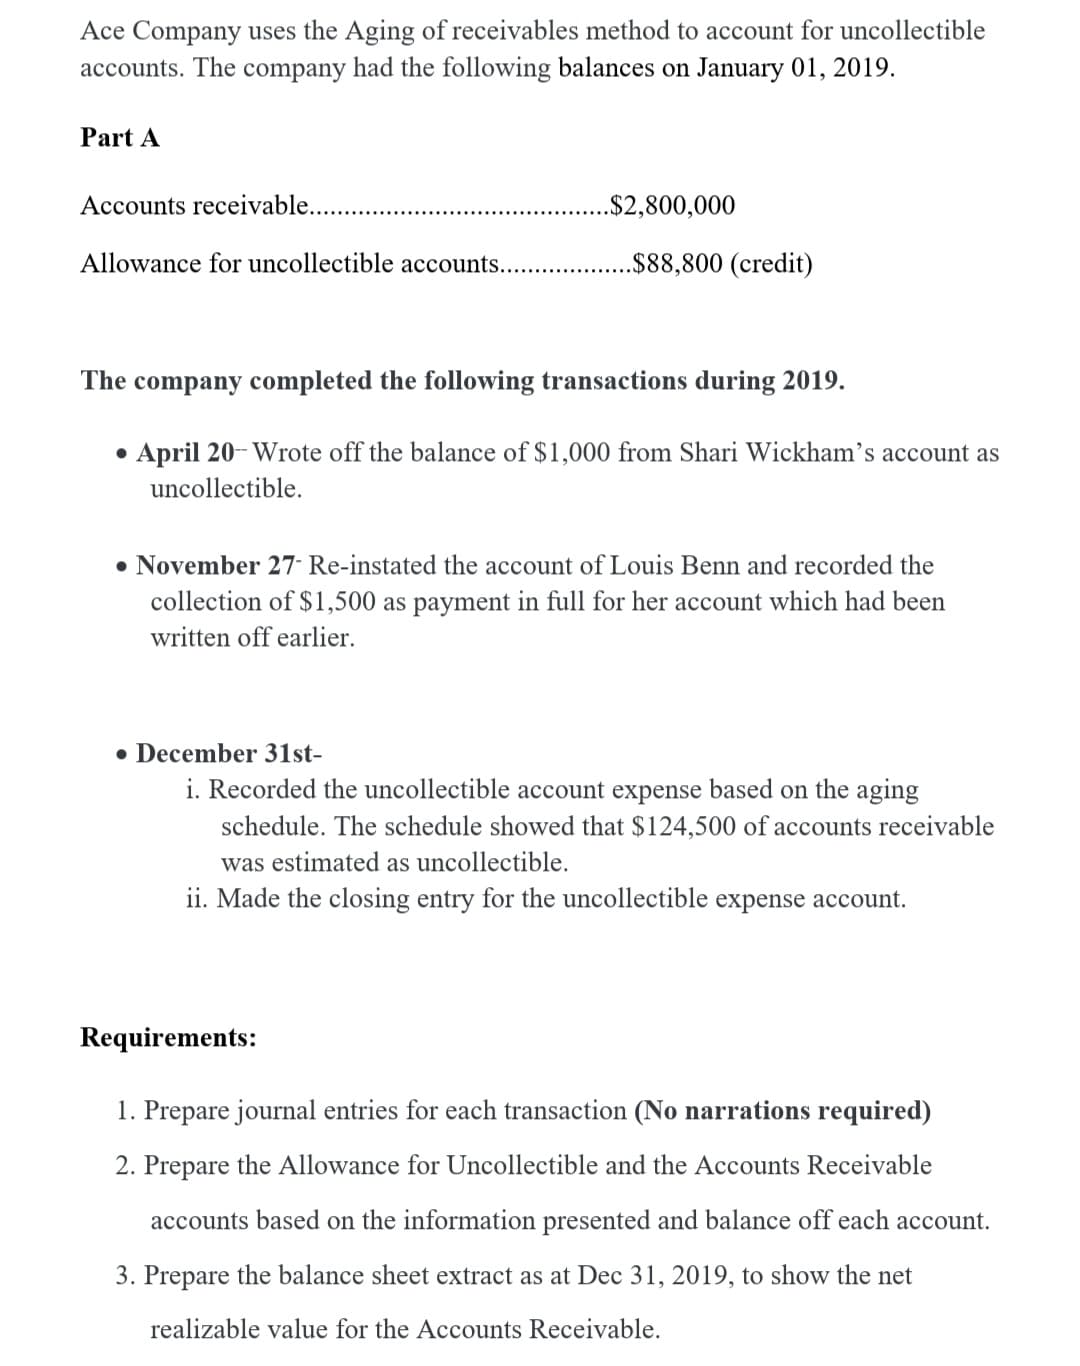 Ace Company uses the Aging of receivables method to account for uncollectible
accounts. The company had the following balances on January 01, 2019.
Part A
Accounts receivable..
.$2,800,000
Allowance for uncollectible accounts... .
.$88,800 (credit)
The company completed the following transactions during 2019.
• April 20- Wrote off the balance of $1,000 from Shari Wickham's account as
uncollectible.
• November 27 Re-instated the account of Louis Benn and recorded the
collection of $1,500 as payment in full for her account which had been
written off earlier.
• December 31st-
i. Recorded the uncollectible account expense based on the aging
schedule. The schedule showed that $124,500 of accounts receivable
was estimated as uncollectible.
ii. Made the closing entry for the uncollectible expense account.
Requirements:
1. Prepare journal entries for each transaction (No narrations required)
2. Prepare the Allowance for Uncollectible and the Accounts Receivable
accounts based on the information presented and balance off each account.
3. Prepare the balance sheet extract as at Dec 31, 2019, to show the net
realizable value for the Accounts Receivable.
